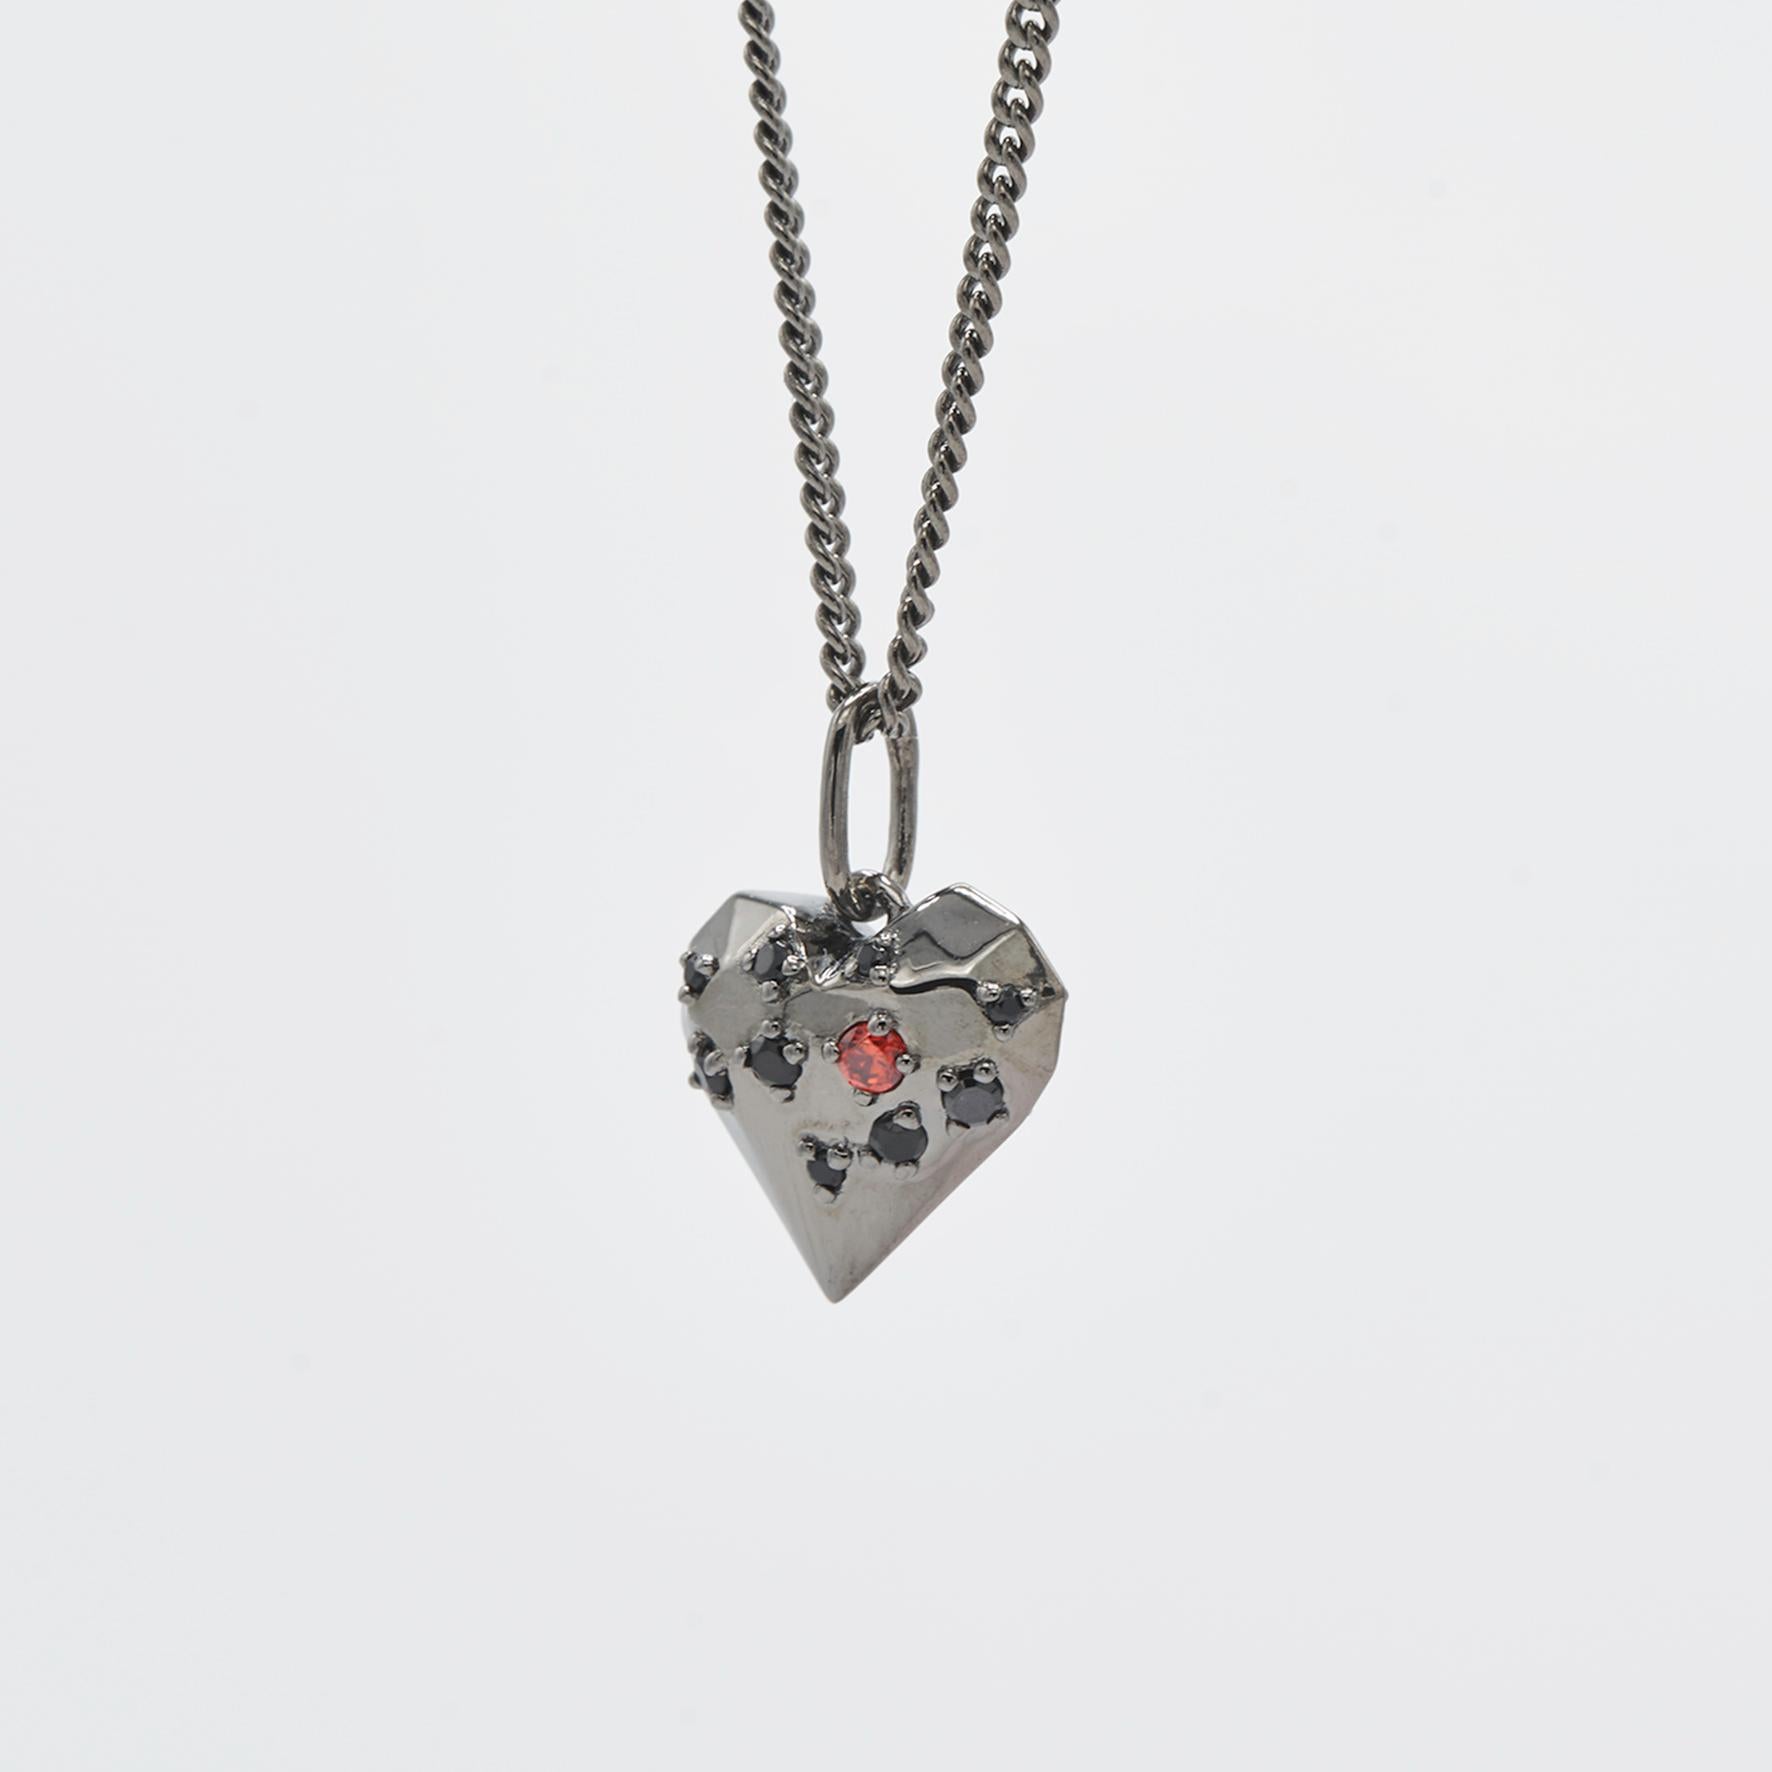 Design-cut heart shape pendant

Dimensions:
10mm x 10mm, chain adjustable           
Composition: 
Sterling Silver black rhodium / cubic zirconia
Sold with chain